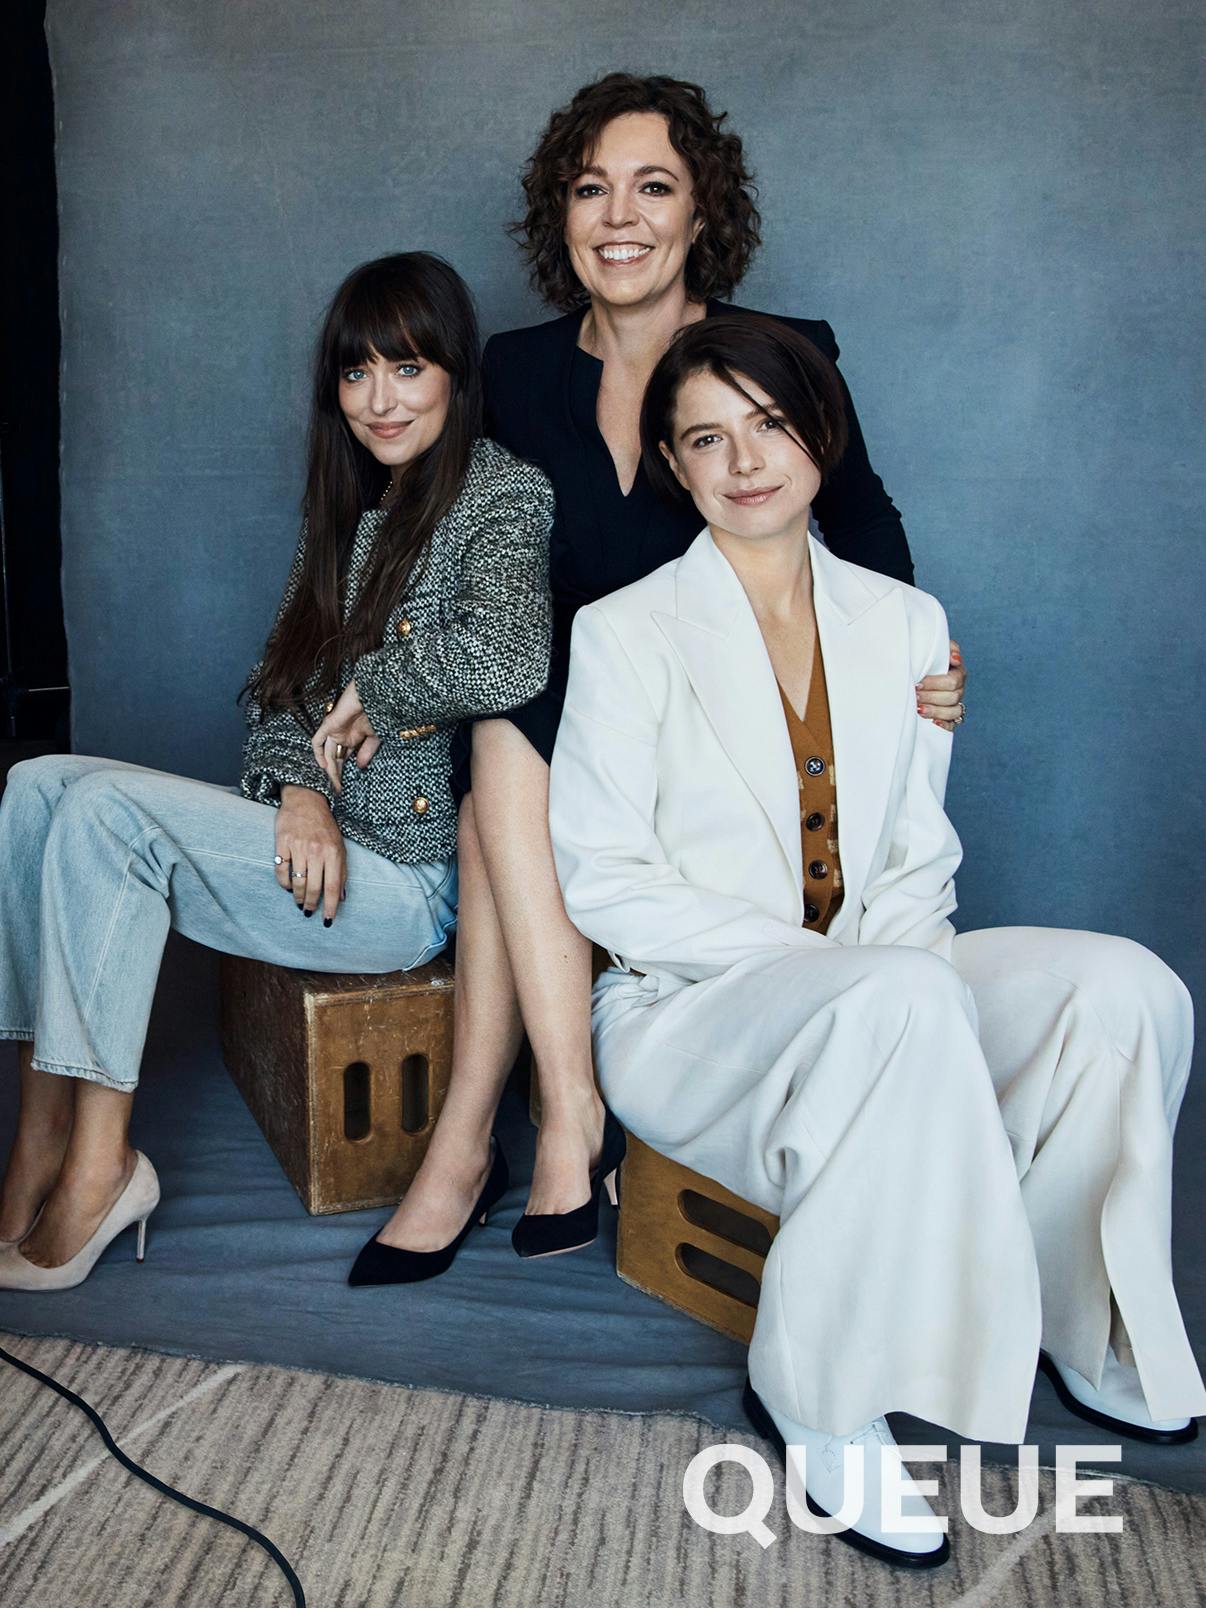 Dakota Johnson, Olivia Colman, and Jessie Buckley sit on wooden crates in front of a grey cloth. Johnson wears light wash jeans, light colored pumps, and a knit jacket. Colman wears a black ensemble and back heels. Buckley wears a white suit and white boots. 